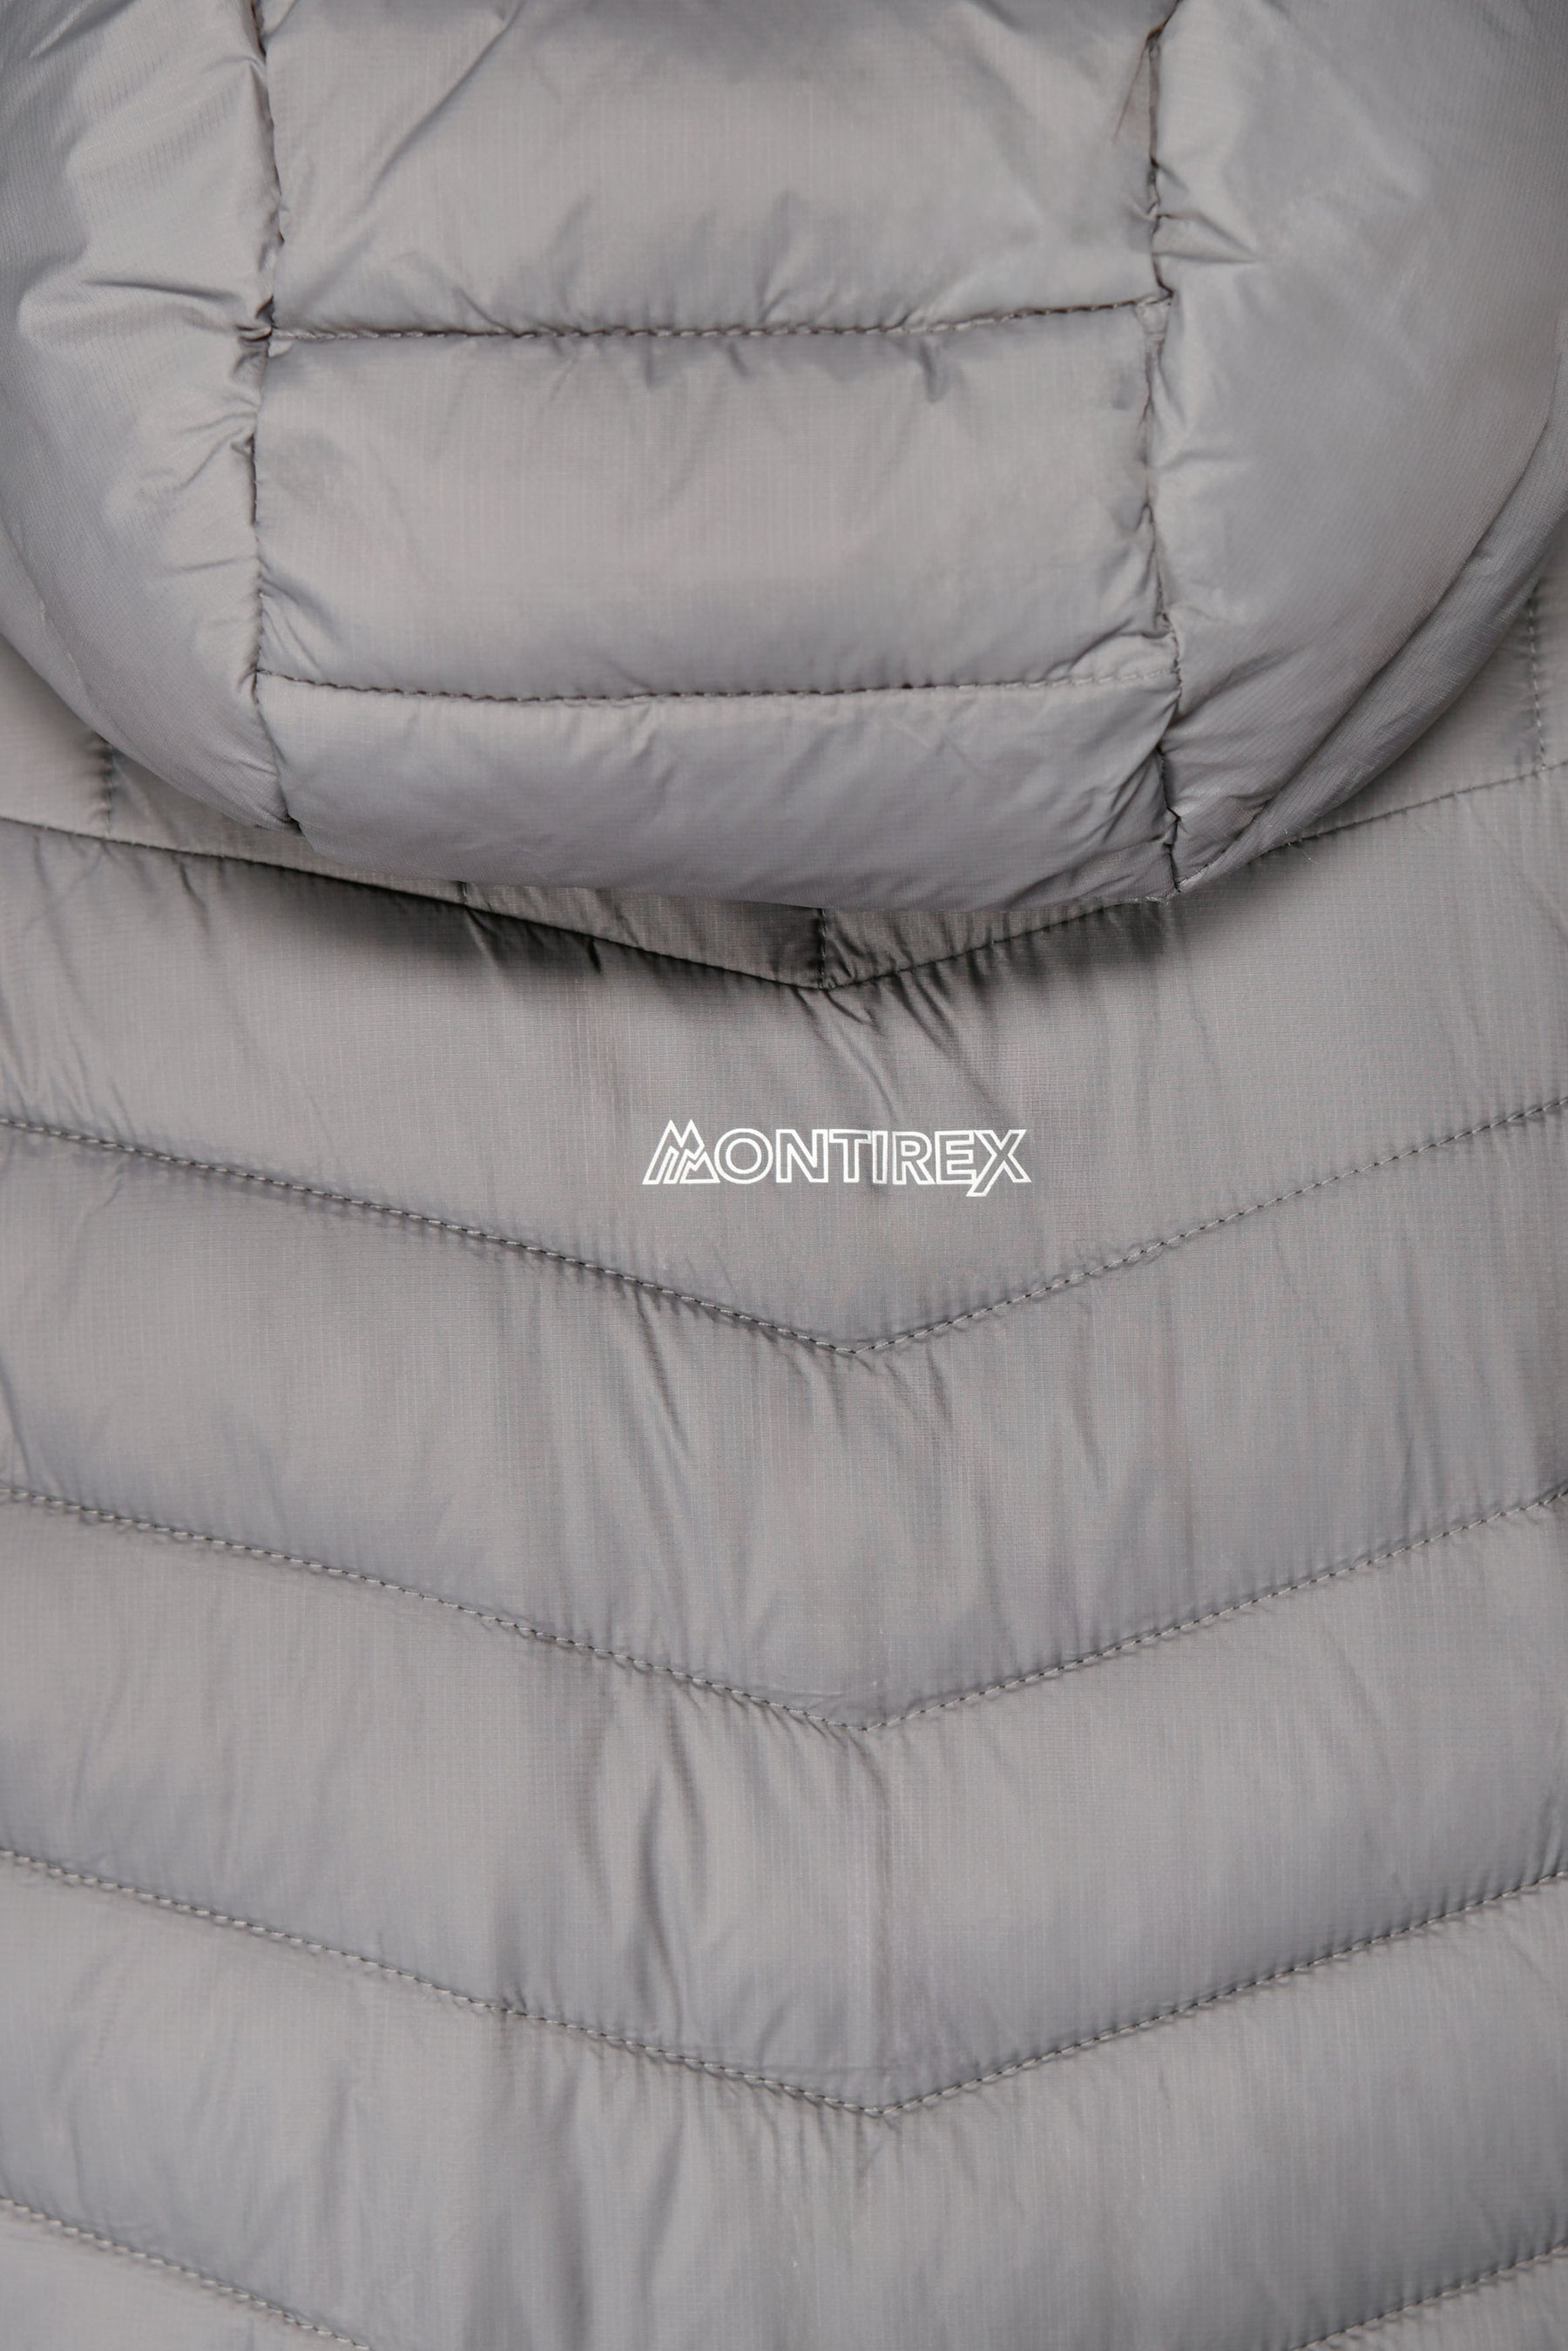 Avalanche Jacket - Cement Grey